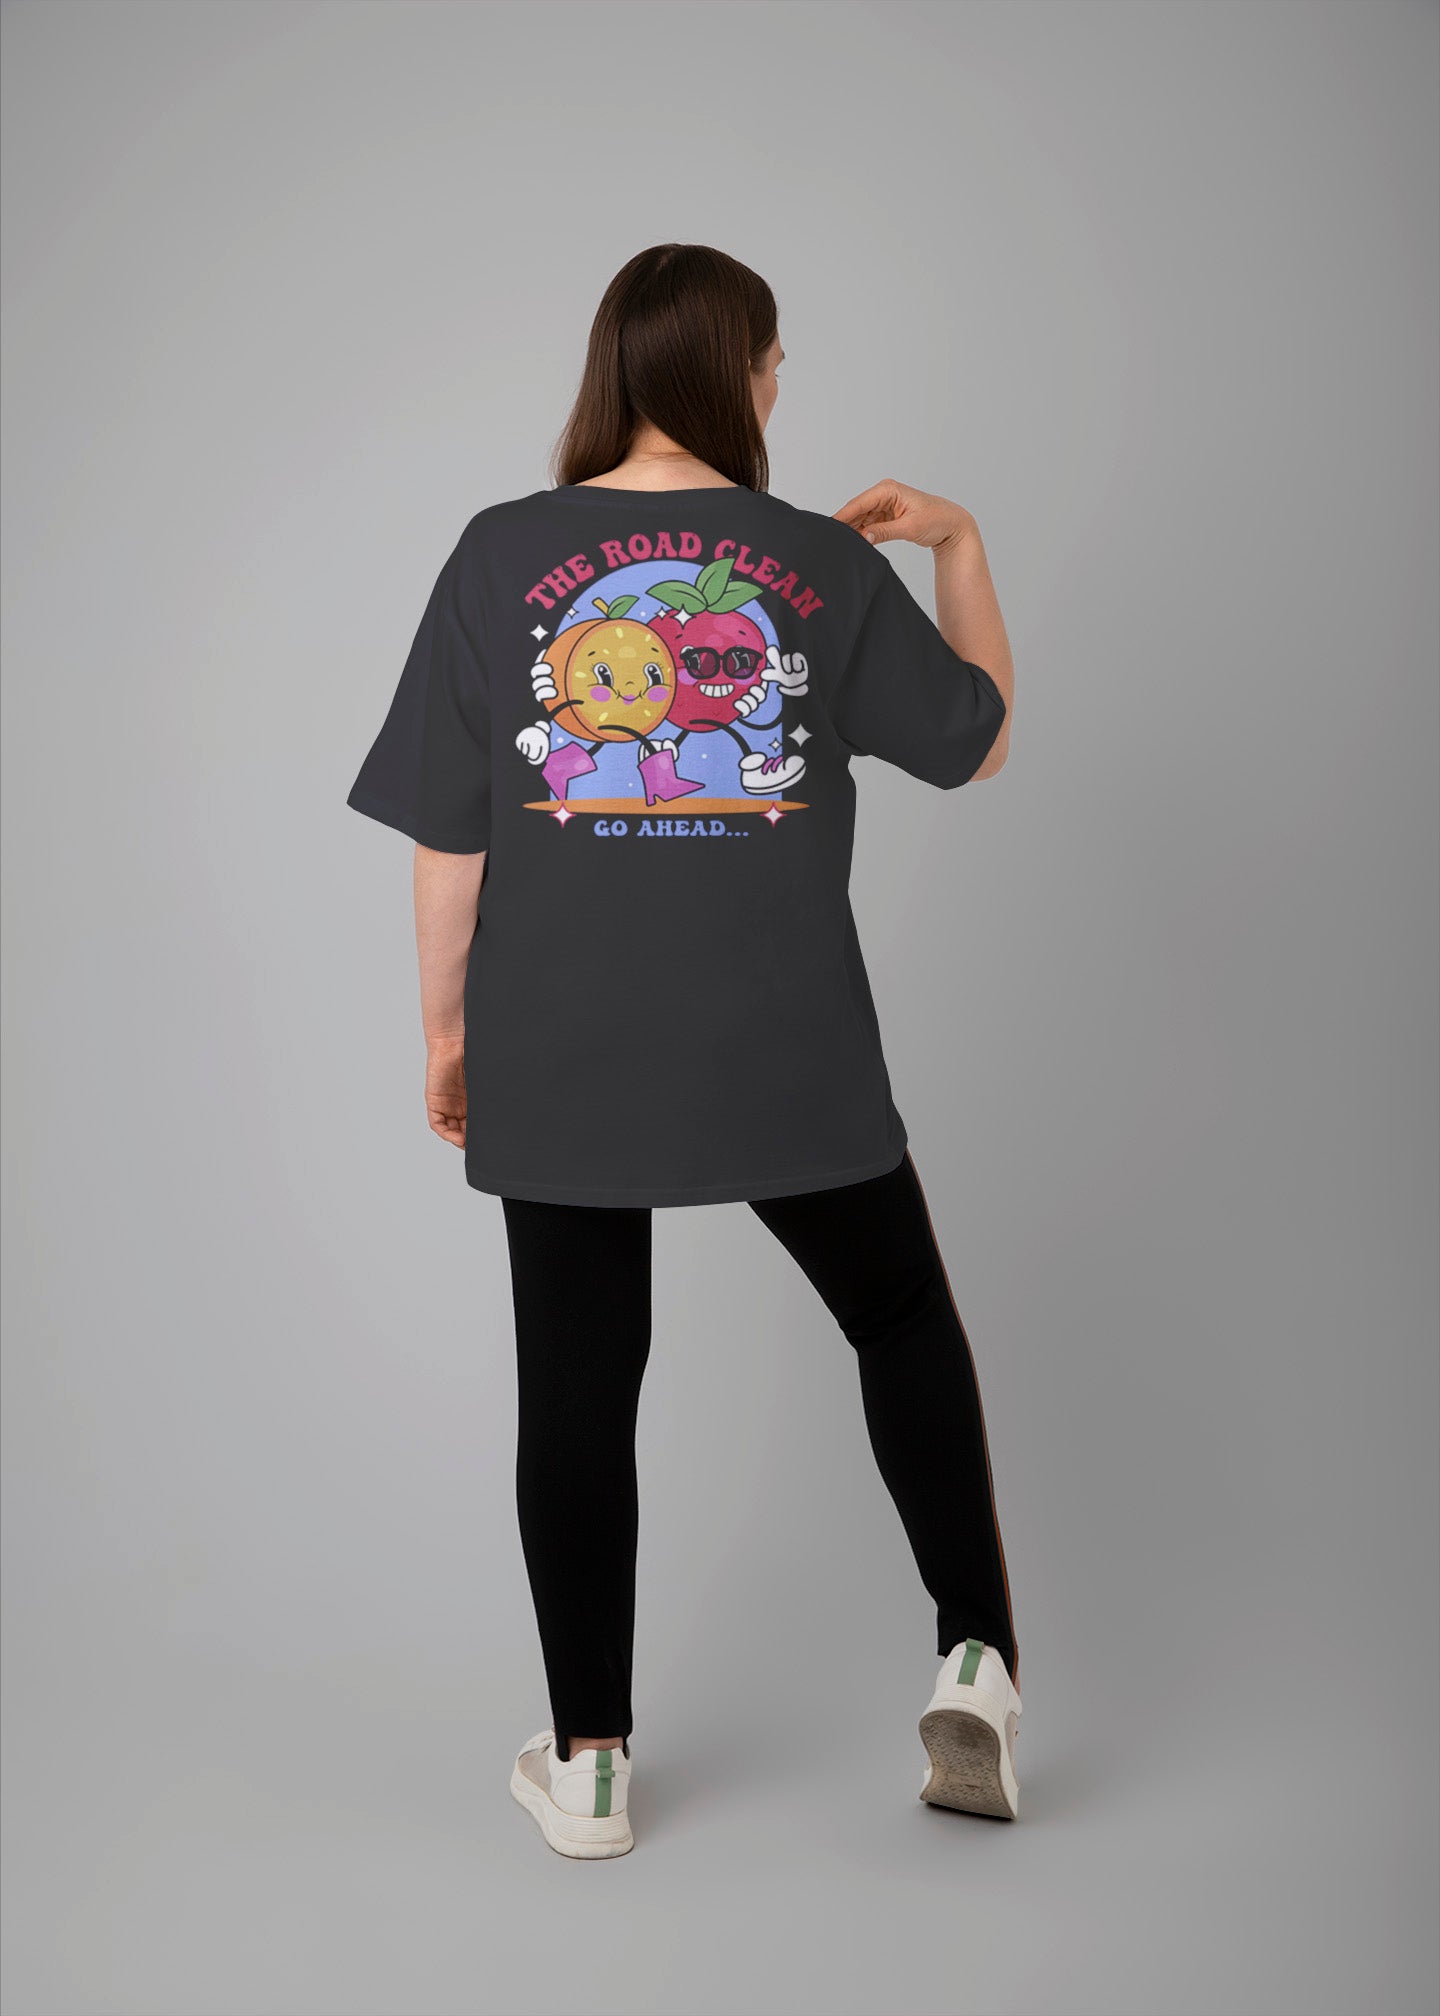 The Road is Clean Go Ahead Graphic Printed Oversized T-shirt